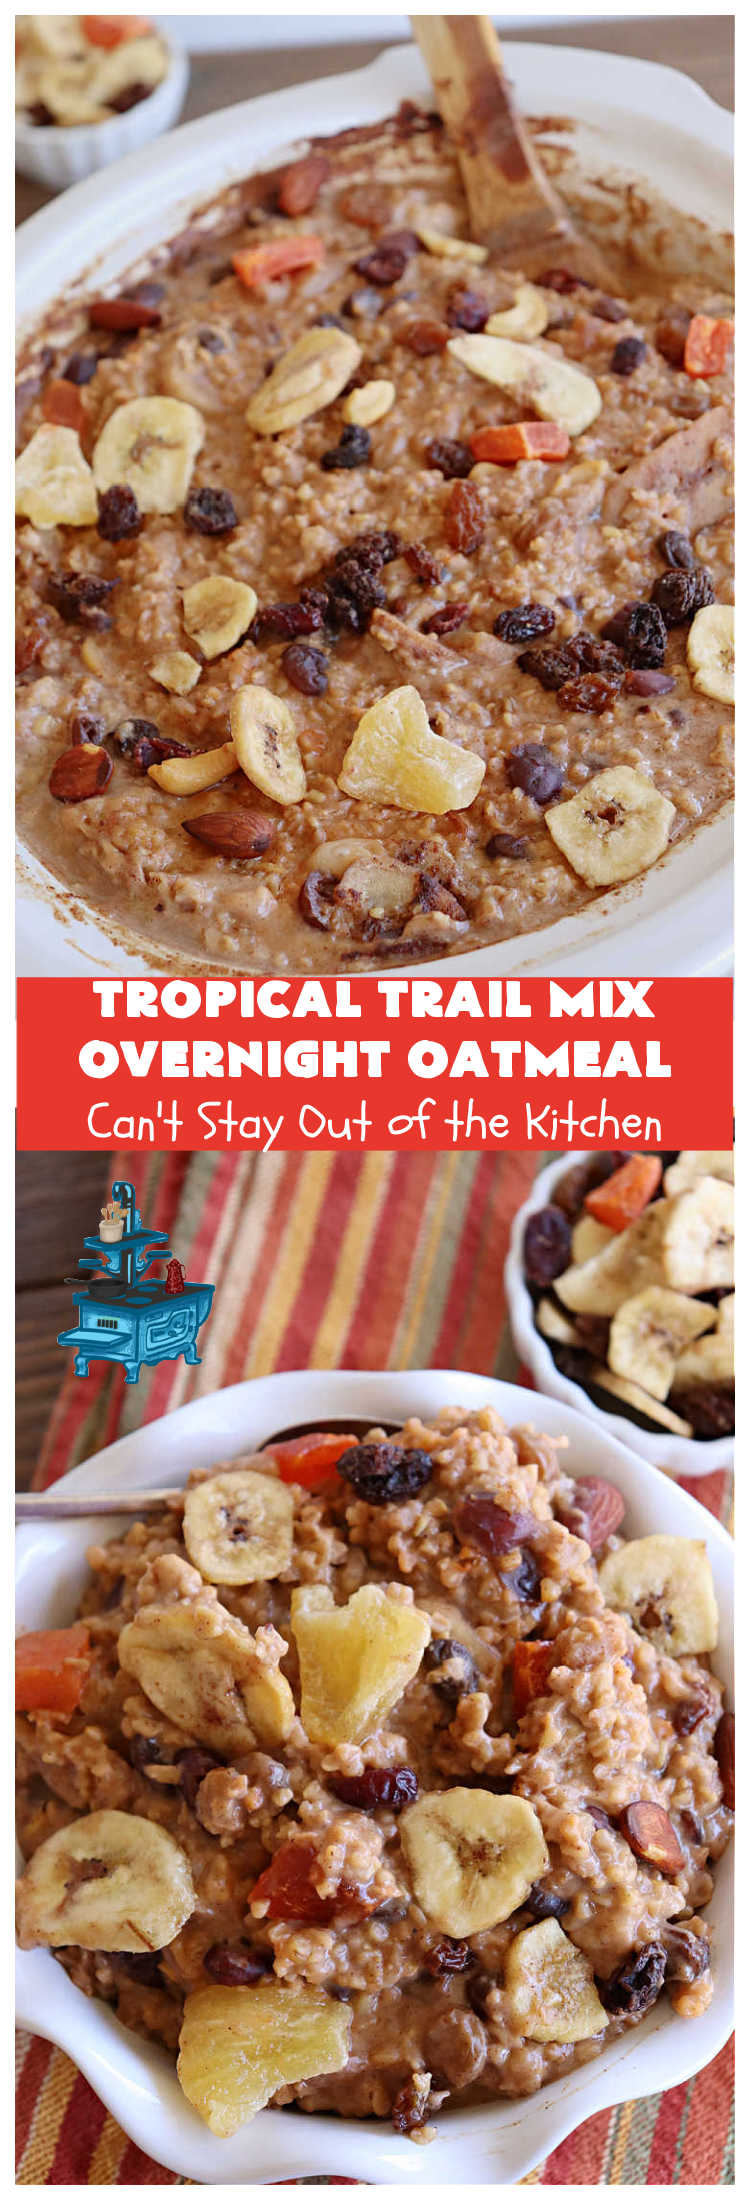 Tropical Trail Mix Overnight Oatmeal | Can't Stay Out of the Kitchen | this luscious #SteelCutOatmeal is fantastic for a family, company or #holiday #breakfast.The #TropicalTrailMix  includes #raisins, #pineapple, #papaya, #bananas, #cashews #DriedCranberries & #almonds. Our favorite #Overnight#Oatmeal #recipe. #oatmeal #cinnamon #TropicalTrailMixOvernightOatmeal